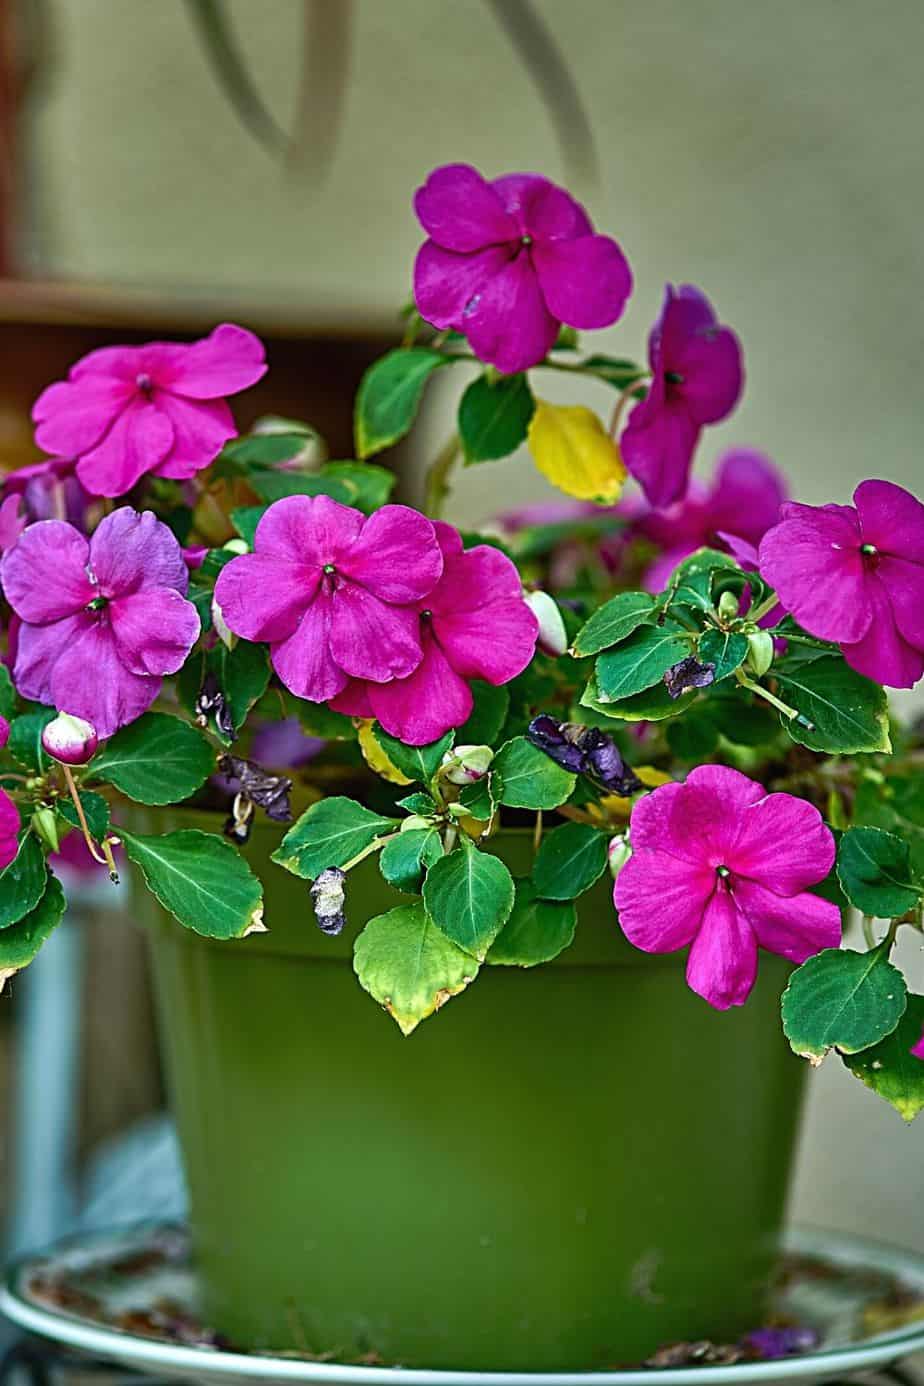 Requiring minimal sunling, Impatiens thrives in the shade which north facing balconies have